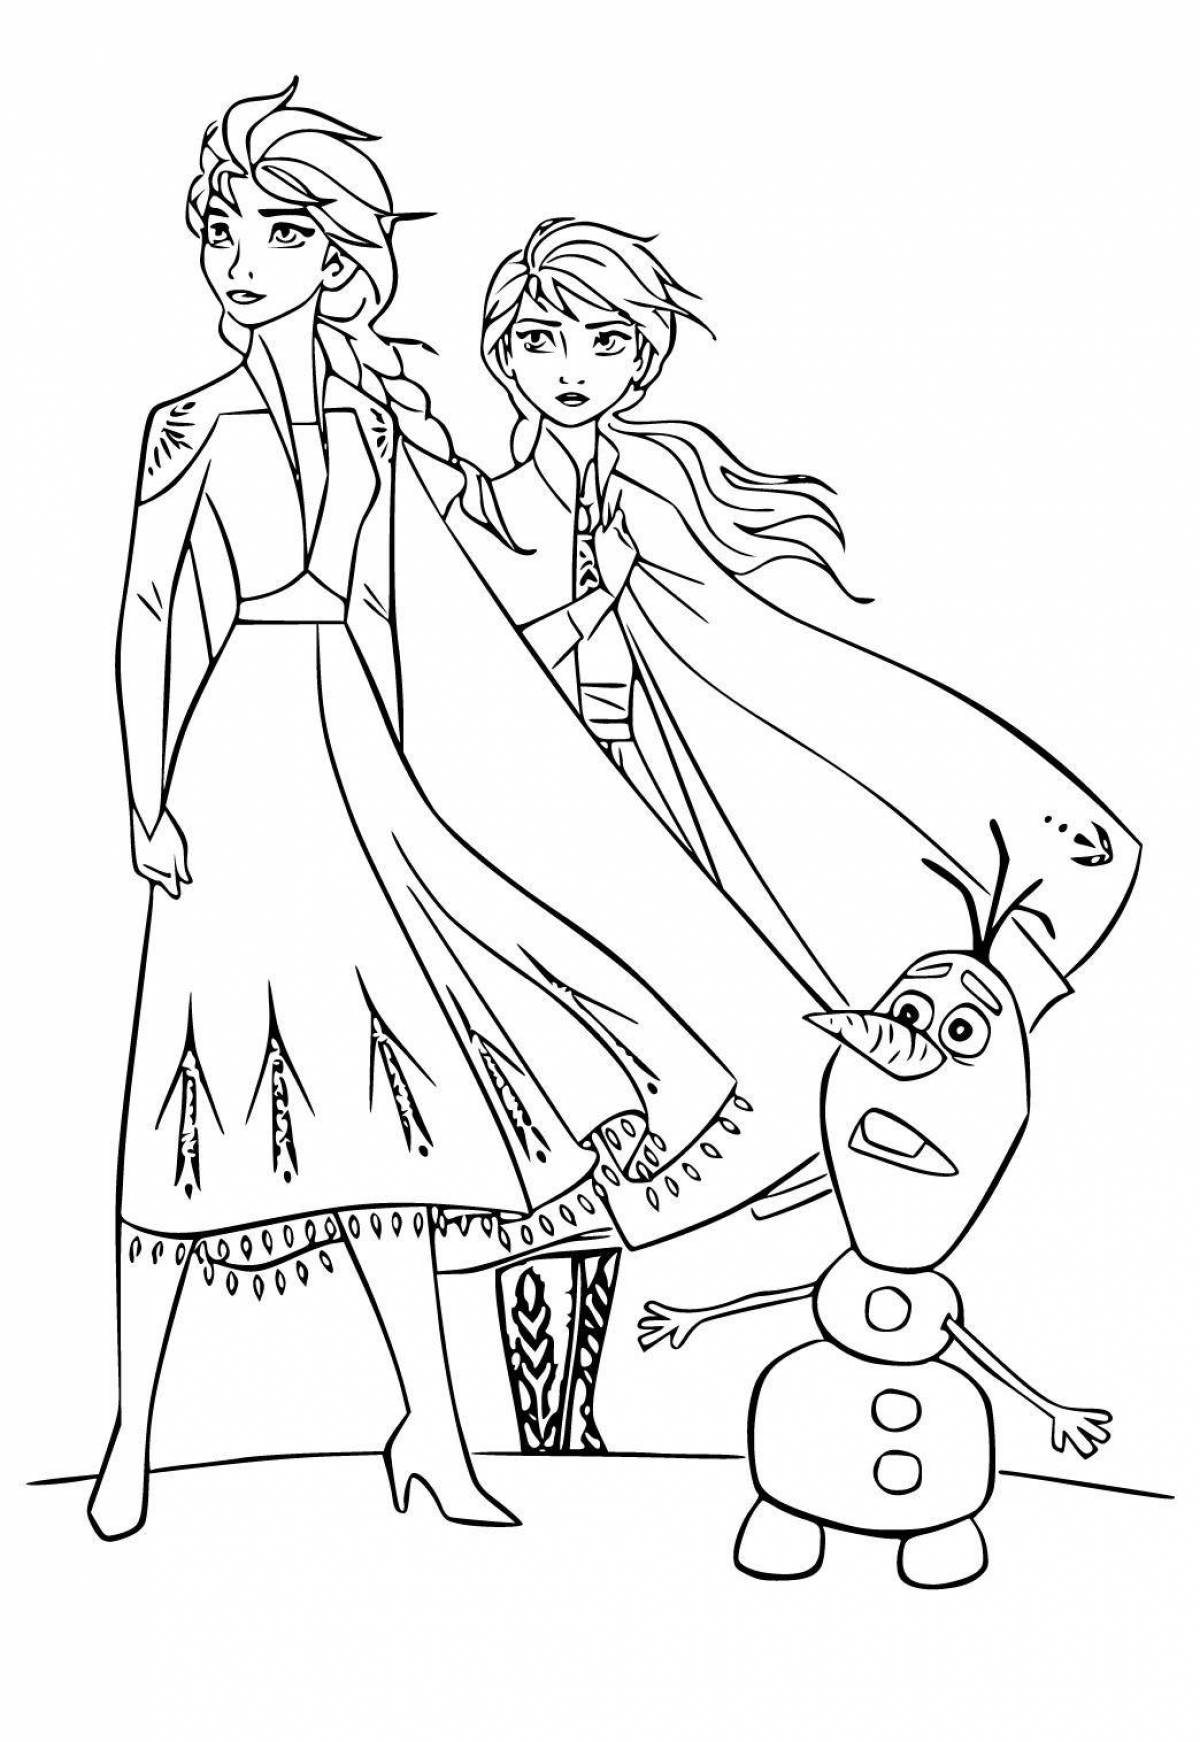 Sparkly anna and olaf coloring book